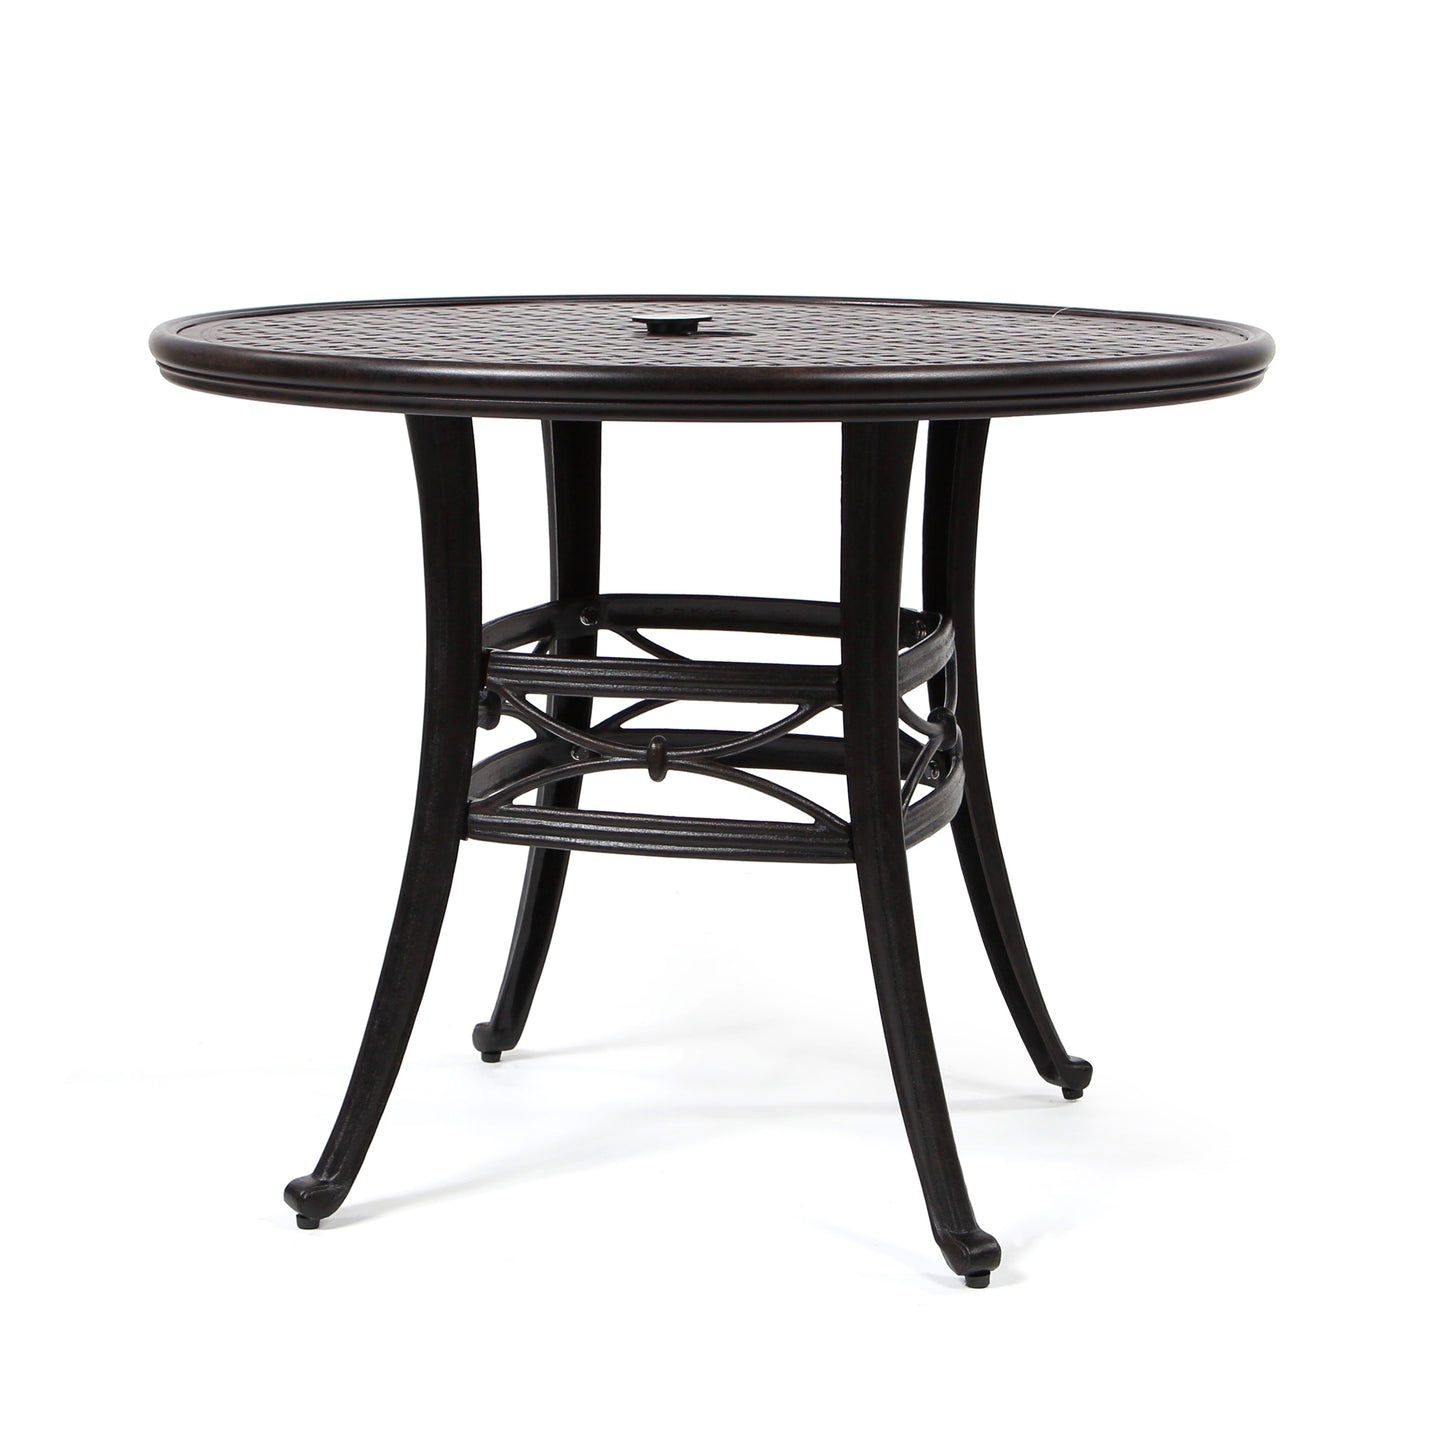 Mallin Napa Collection 36" Round Dining Table, image 1